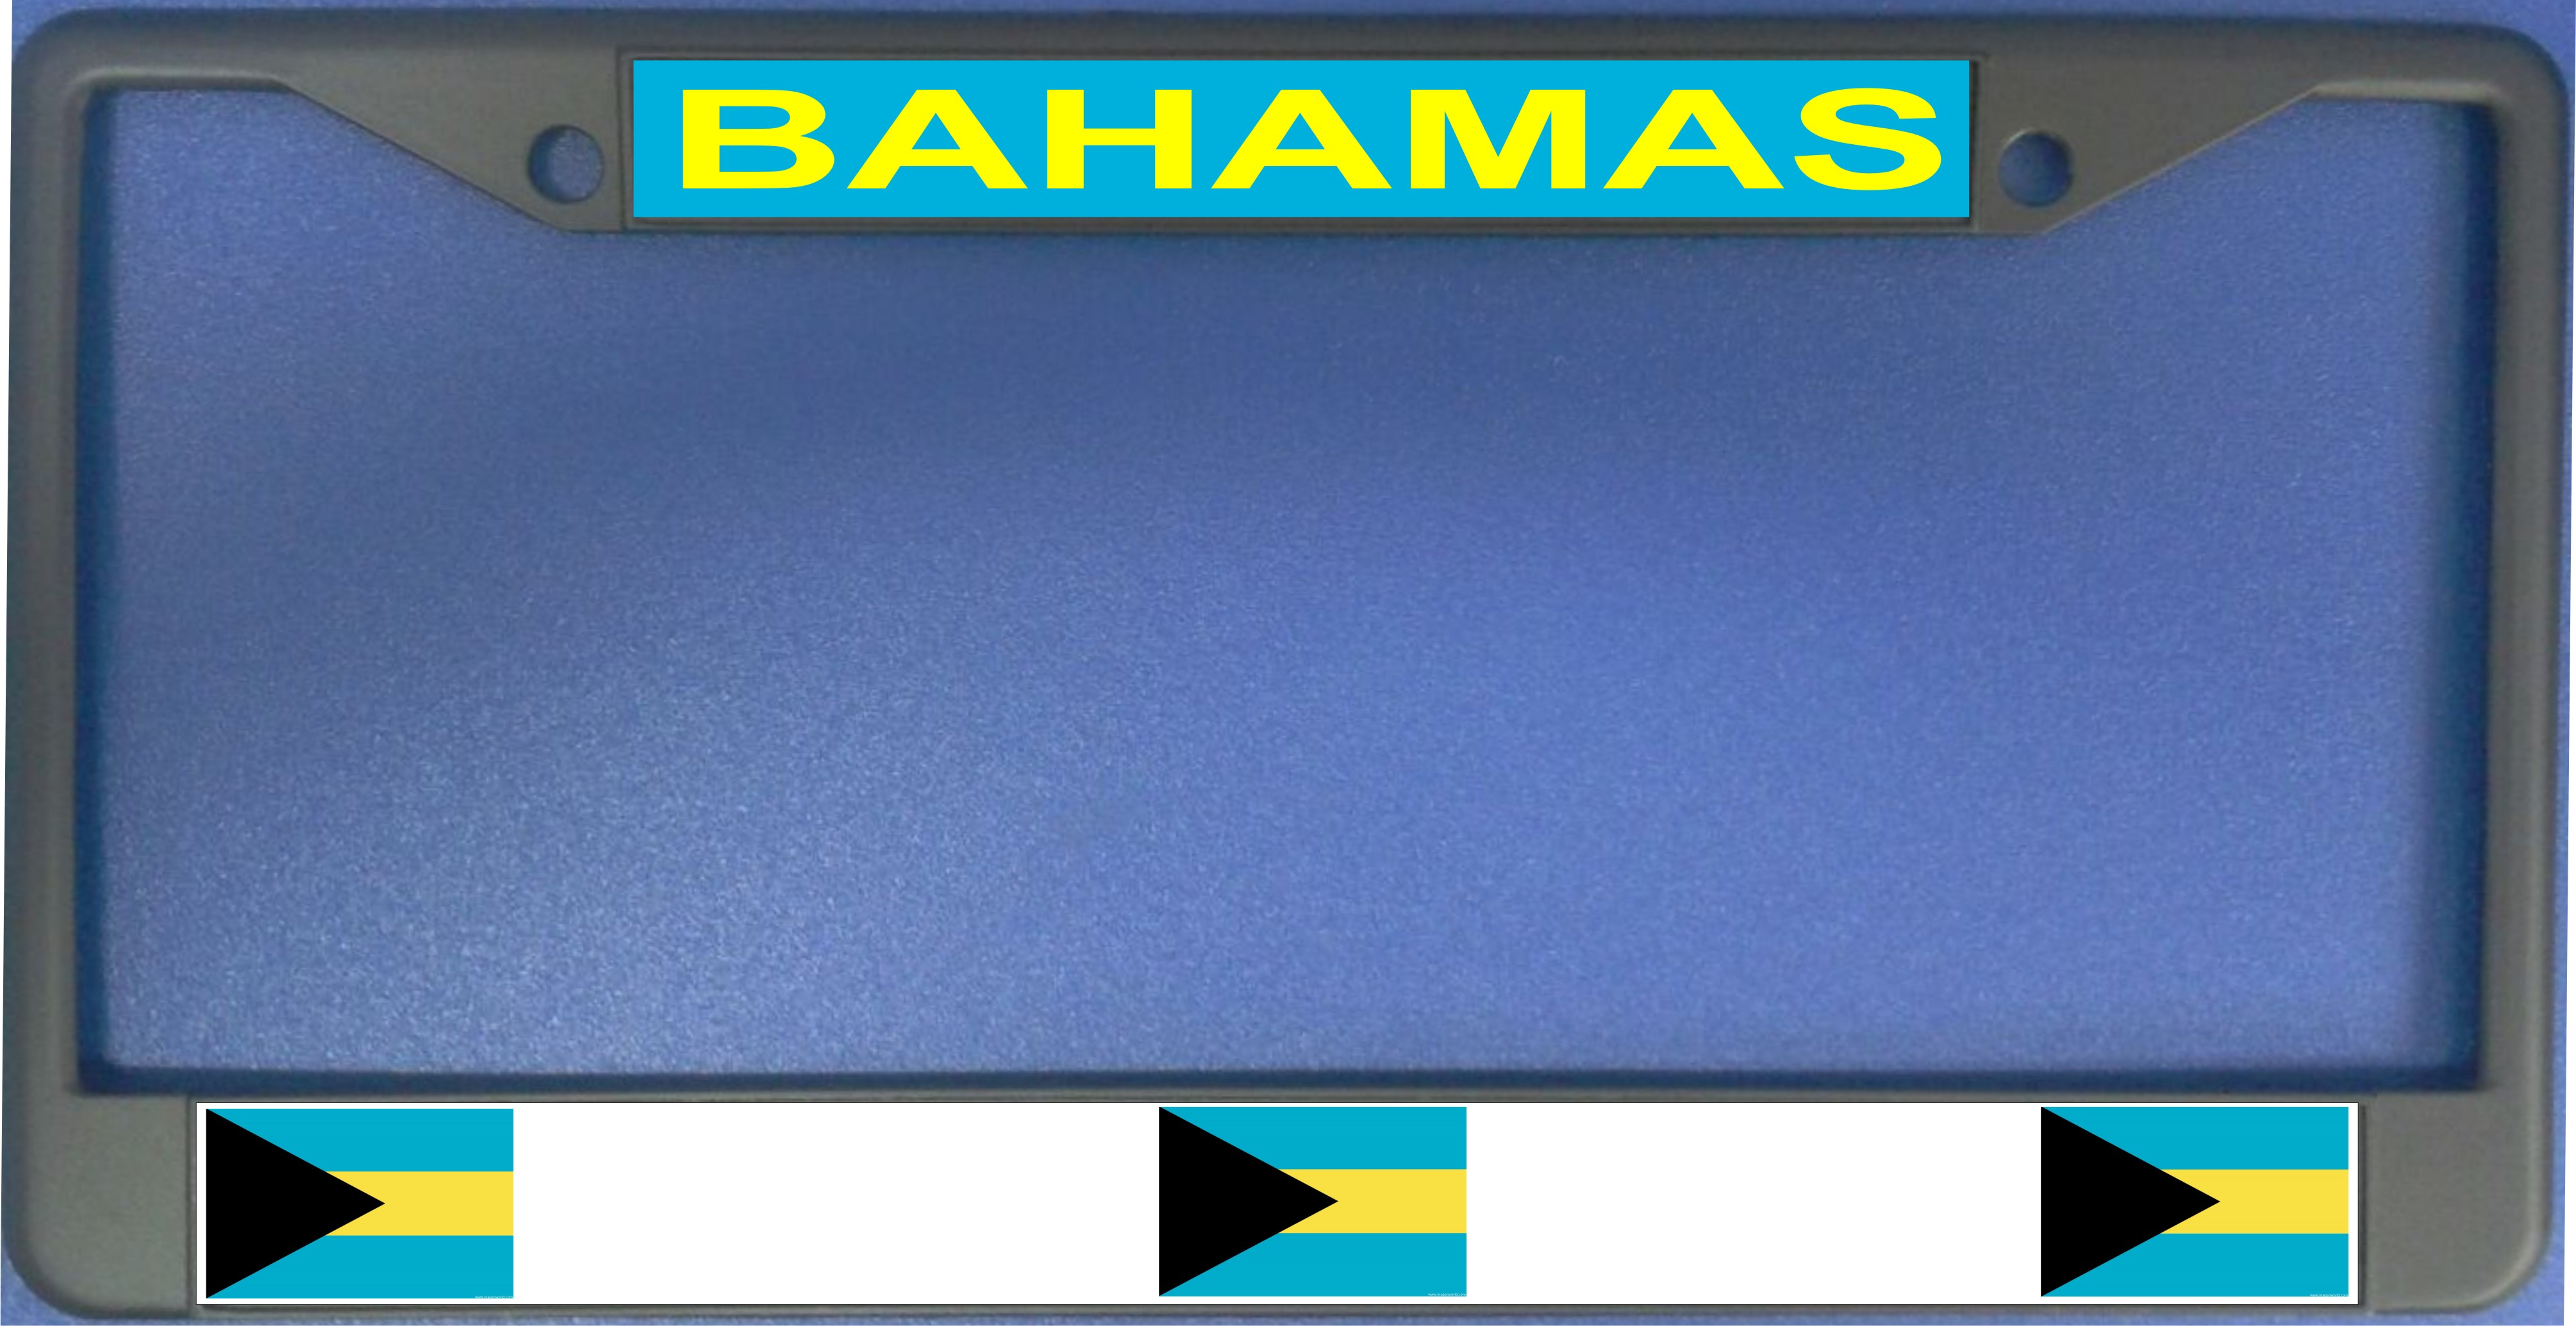 Bahamas FLAG Photo License Plate Frame  Free Screw Caps with this Frame